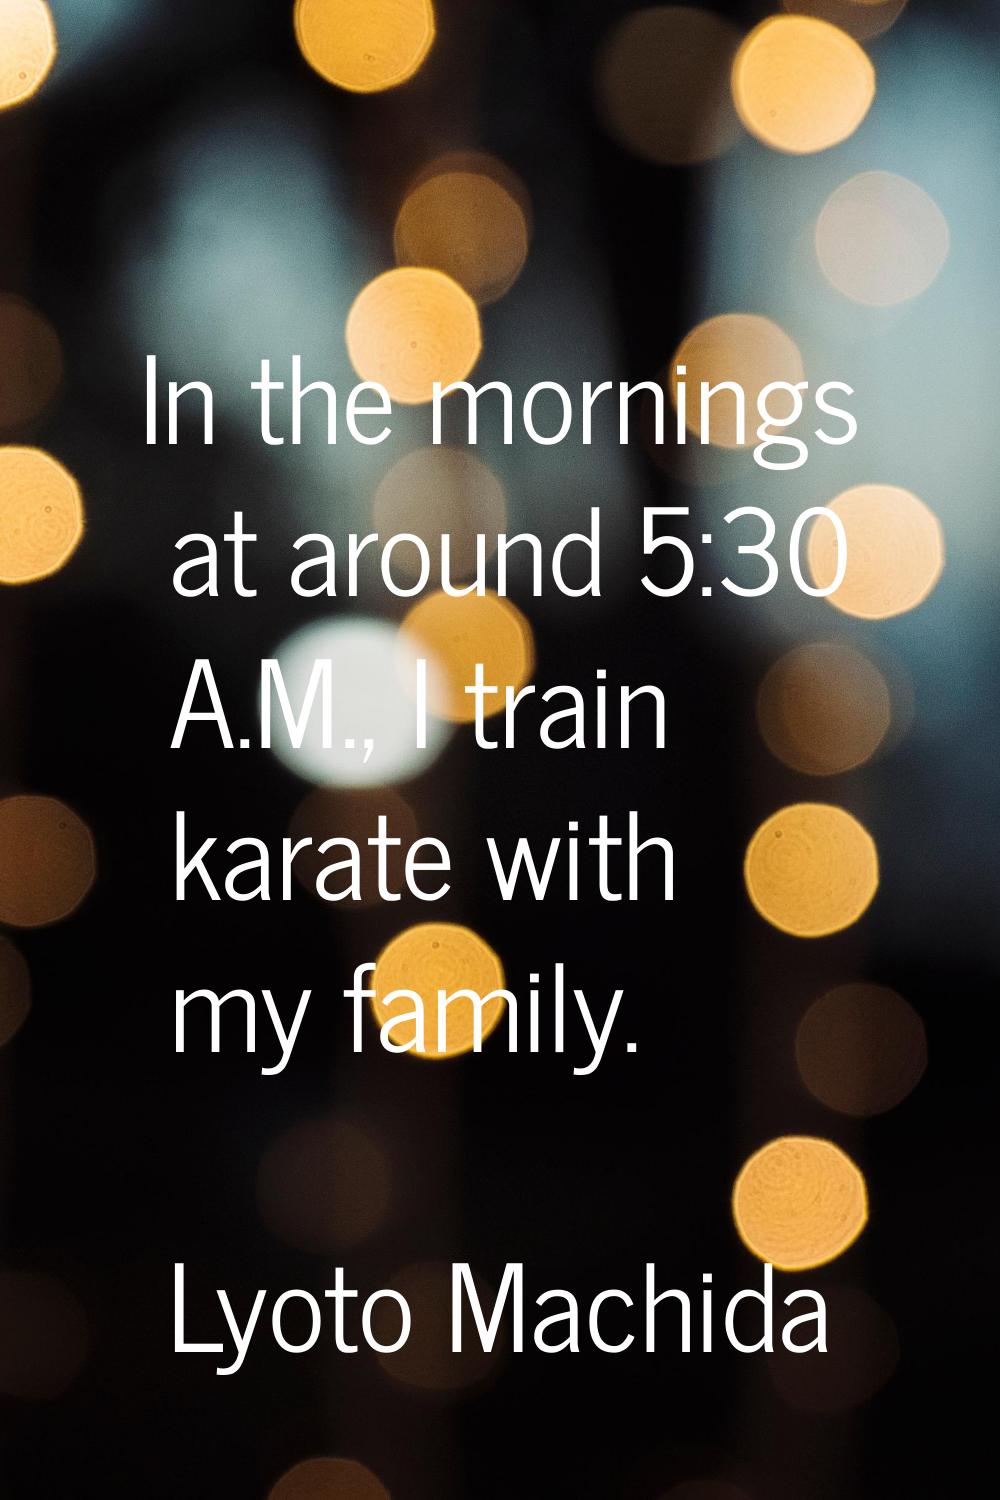 In the mornings at around 5:30 A.M., I train karate with my family.